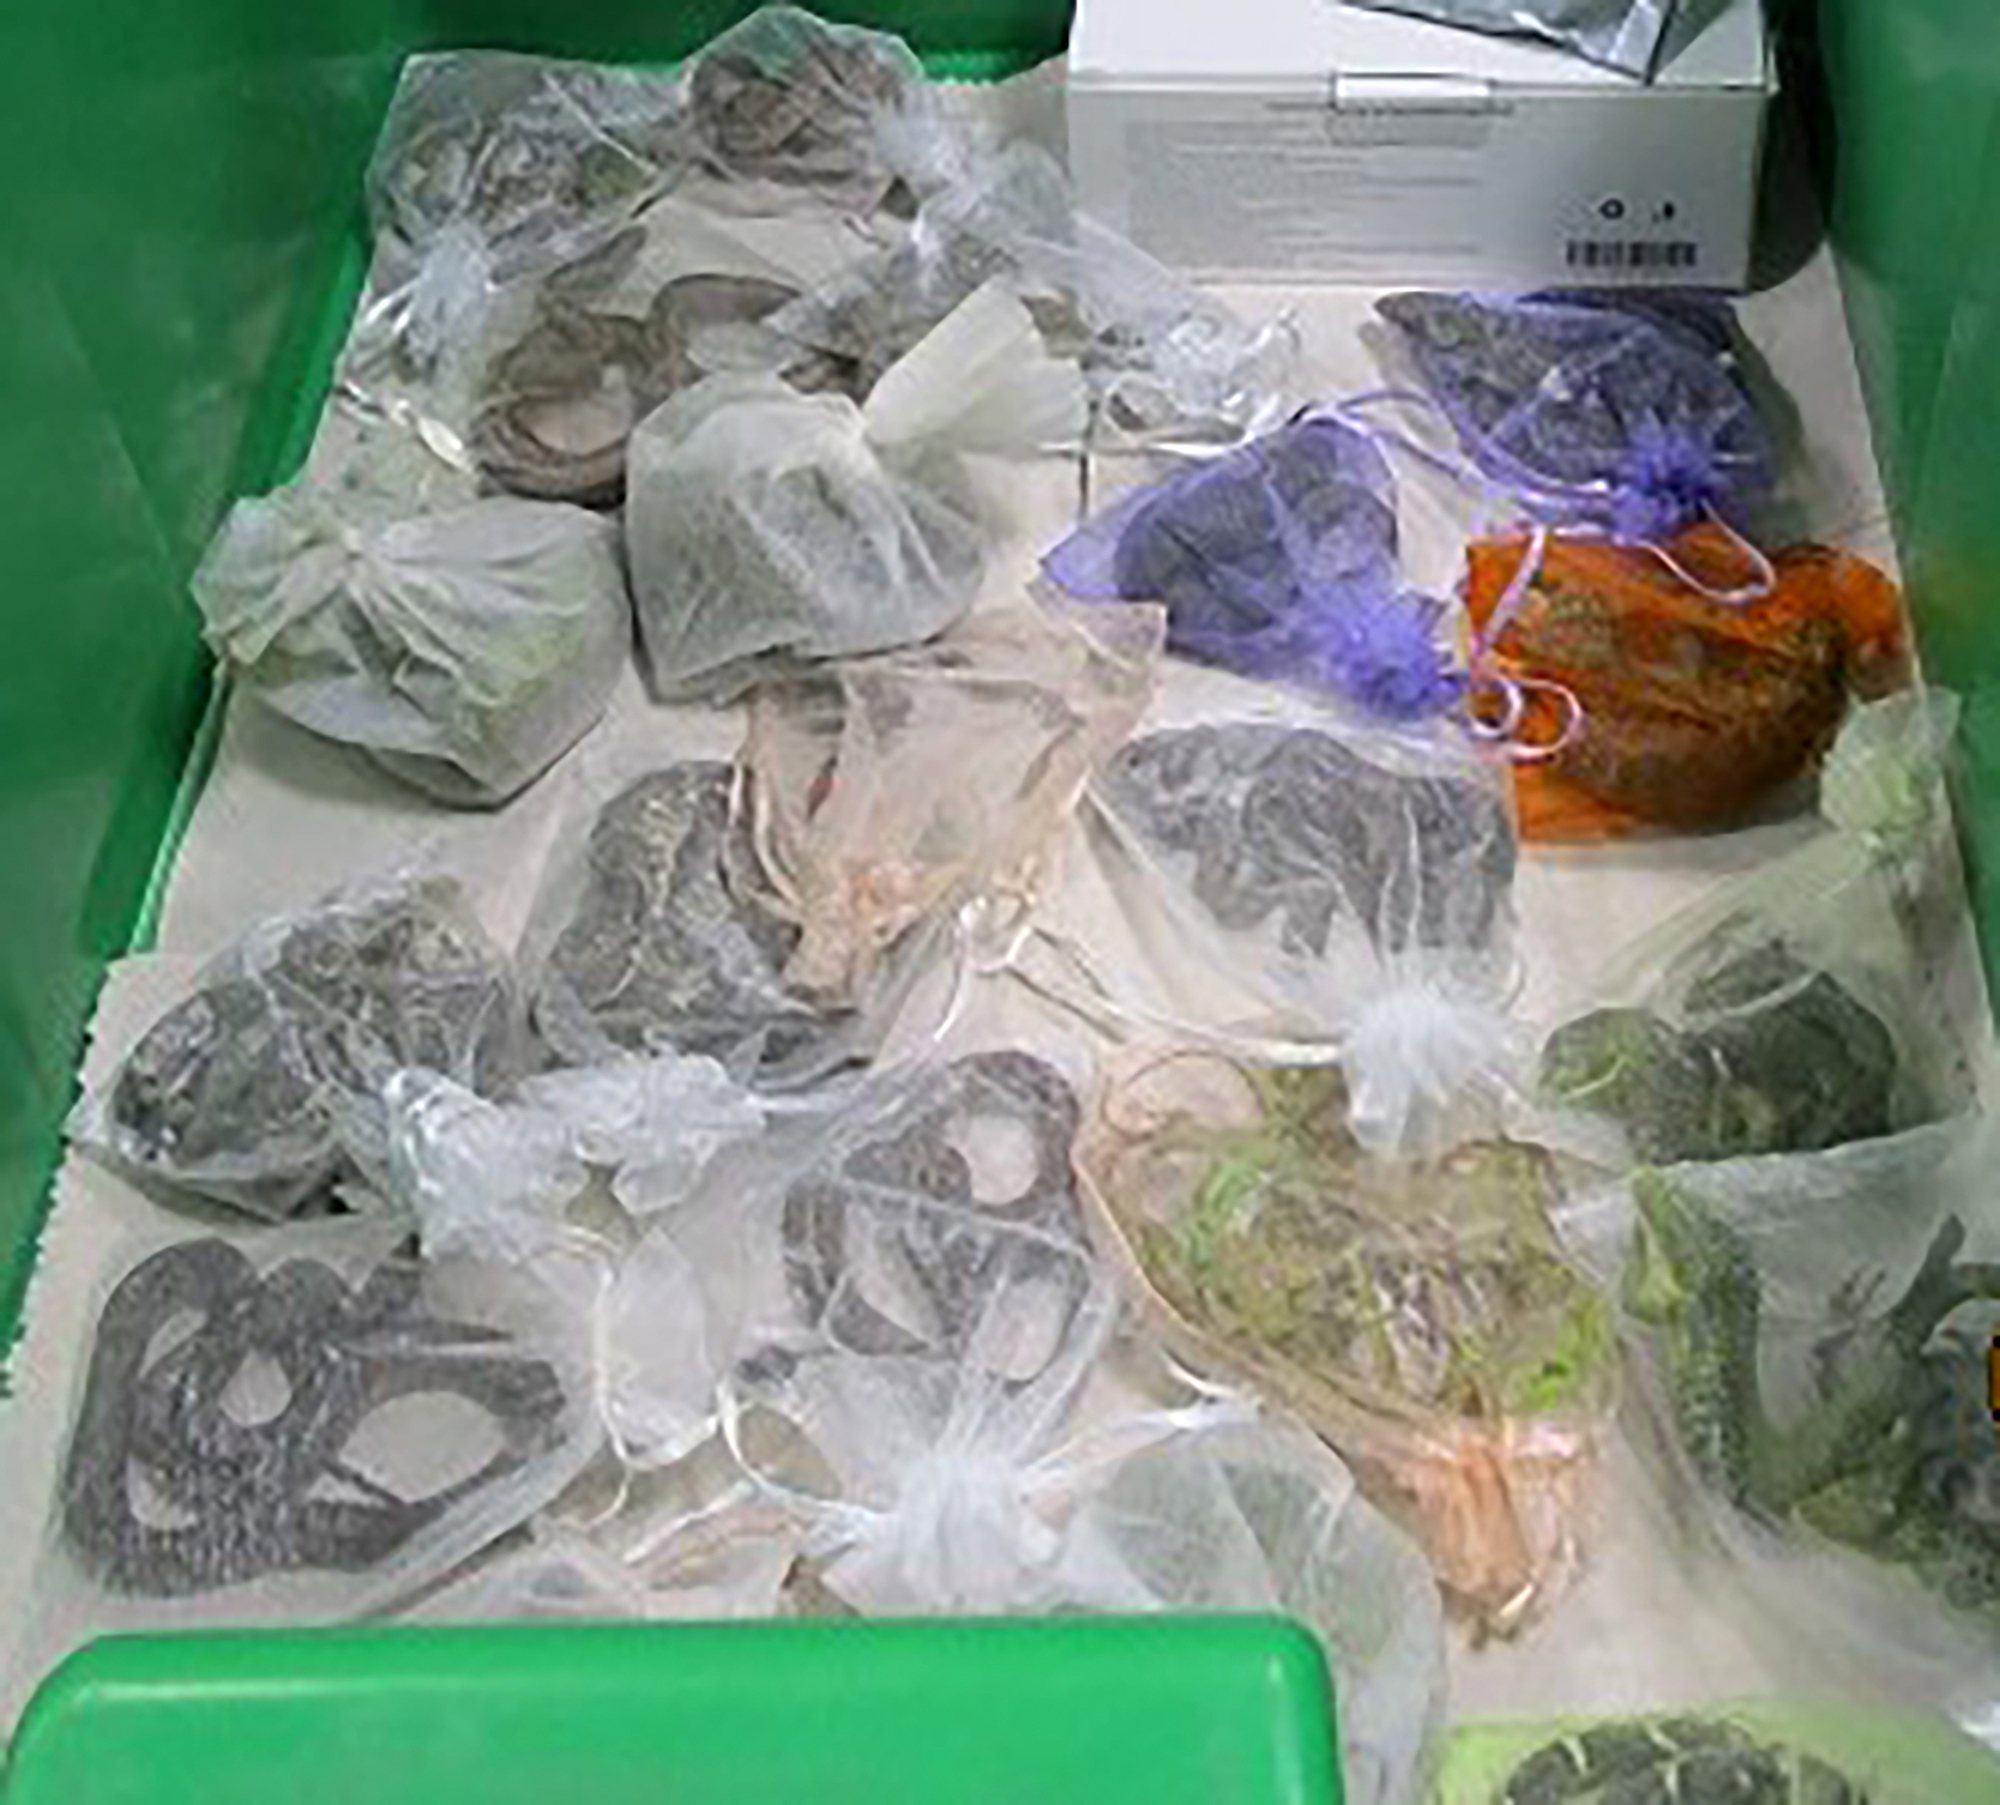 This February 2022 photo provided by the U.S. Customs and Border Protection shows snakes in bags found hidden under and in a man's clothes by CBP officers at the San Ysidro, Calif., port of entry. An alleged smuggler who tried to slither past U.S. border agents in California had dozens of lizards and snakes hidden in his clothing, authorities said Tuesday, March 8, 2022 (U.S. Customs and Border Protection via AP)